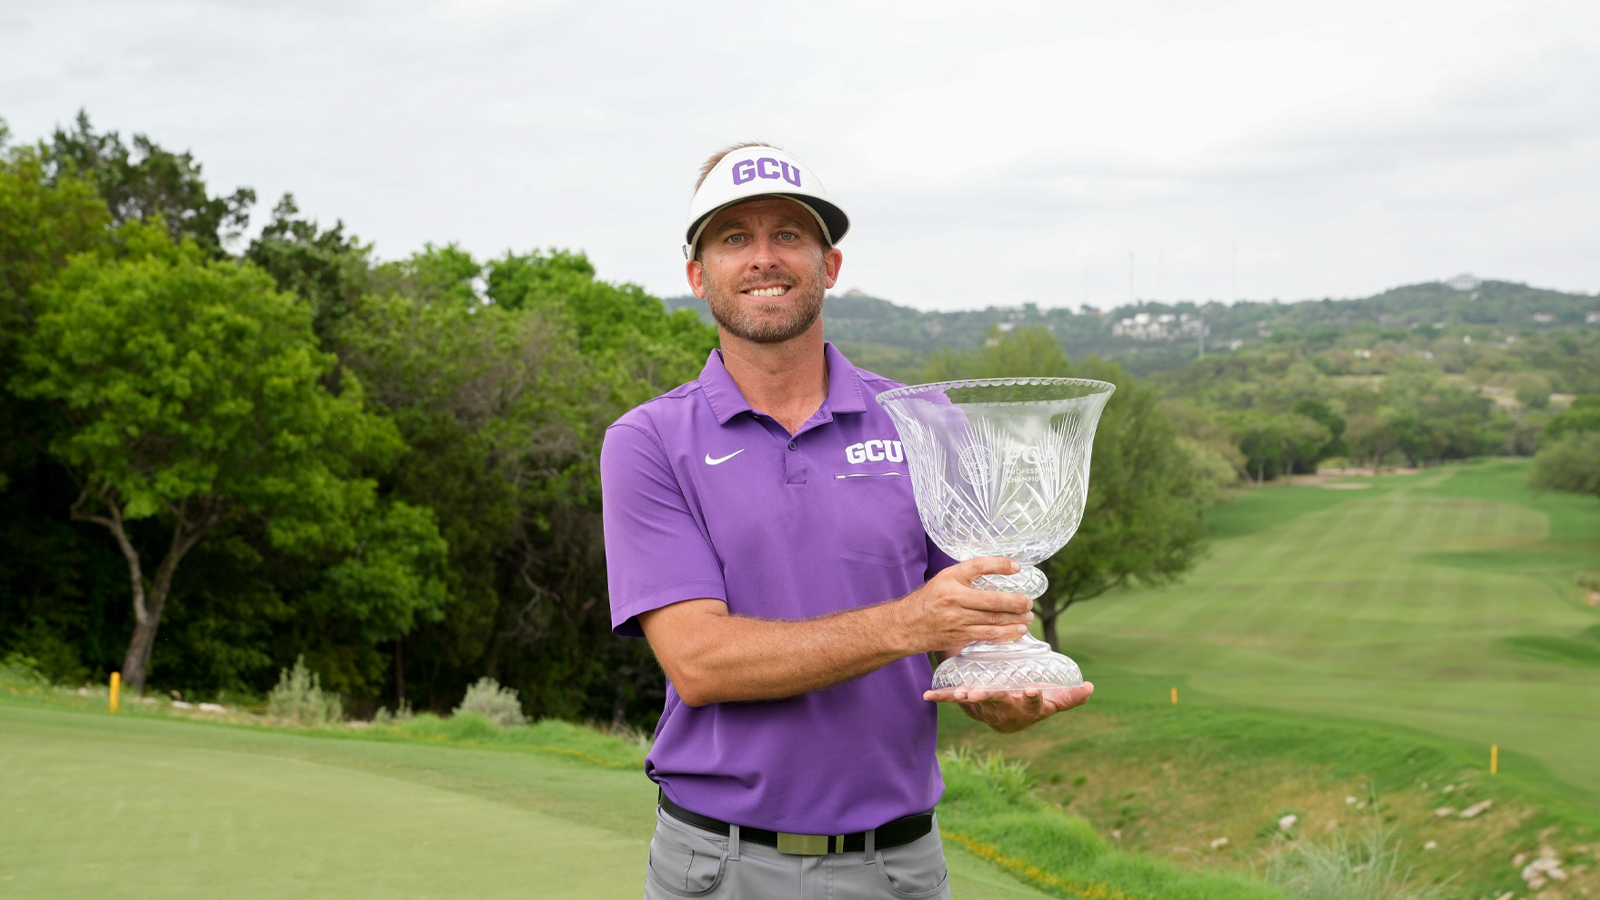 Jesse Mueller poses with the Walter Hagen Cup after the final round of the 54th PGA Professional Championship at the Omni Barton Creek Resort & Spa.